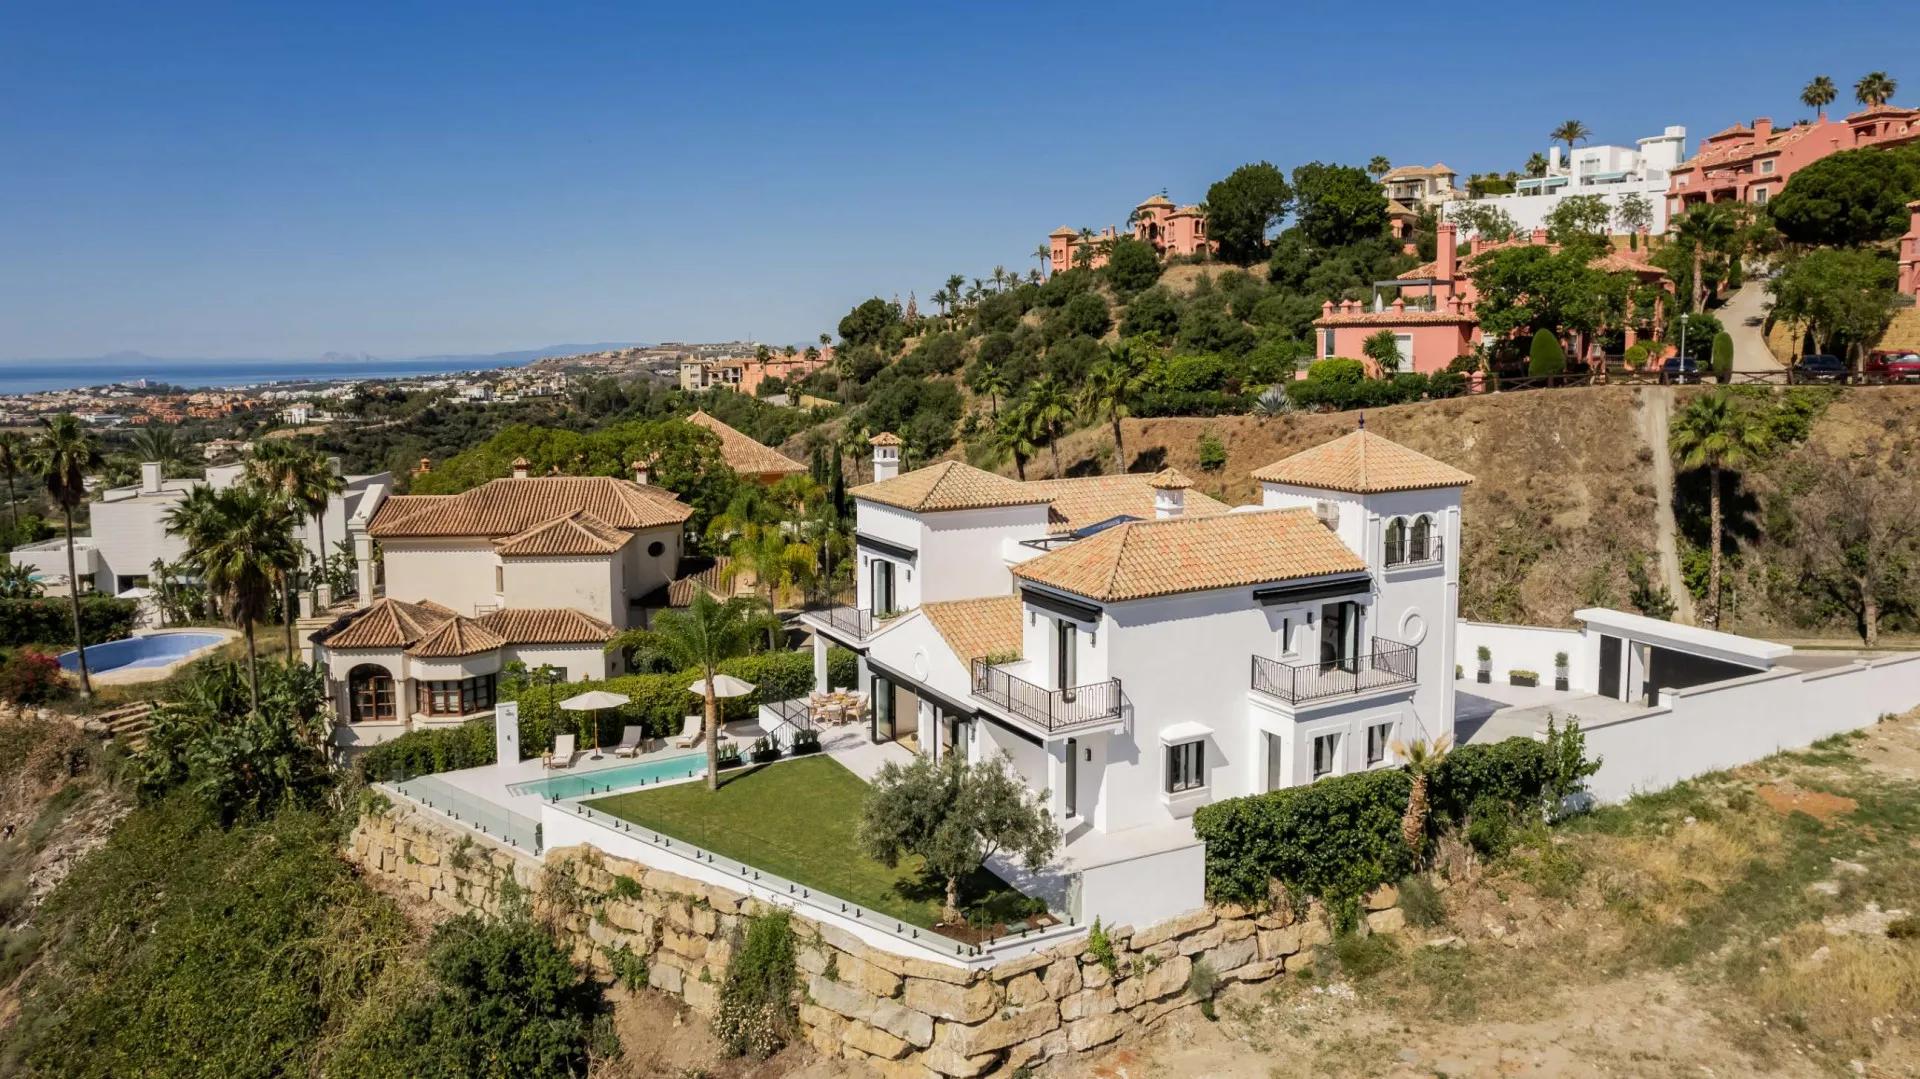 Luxury villa with private gardens and sea views